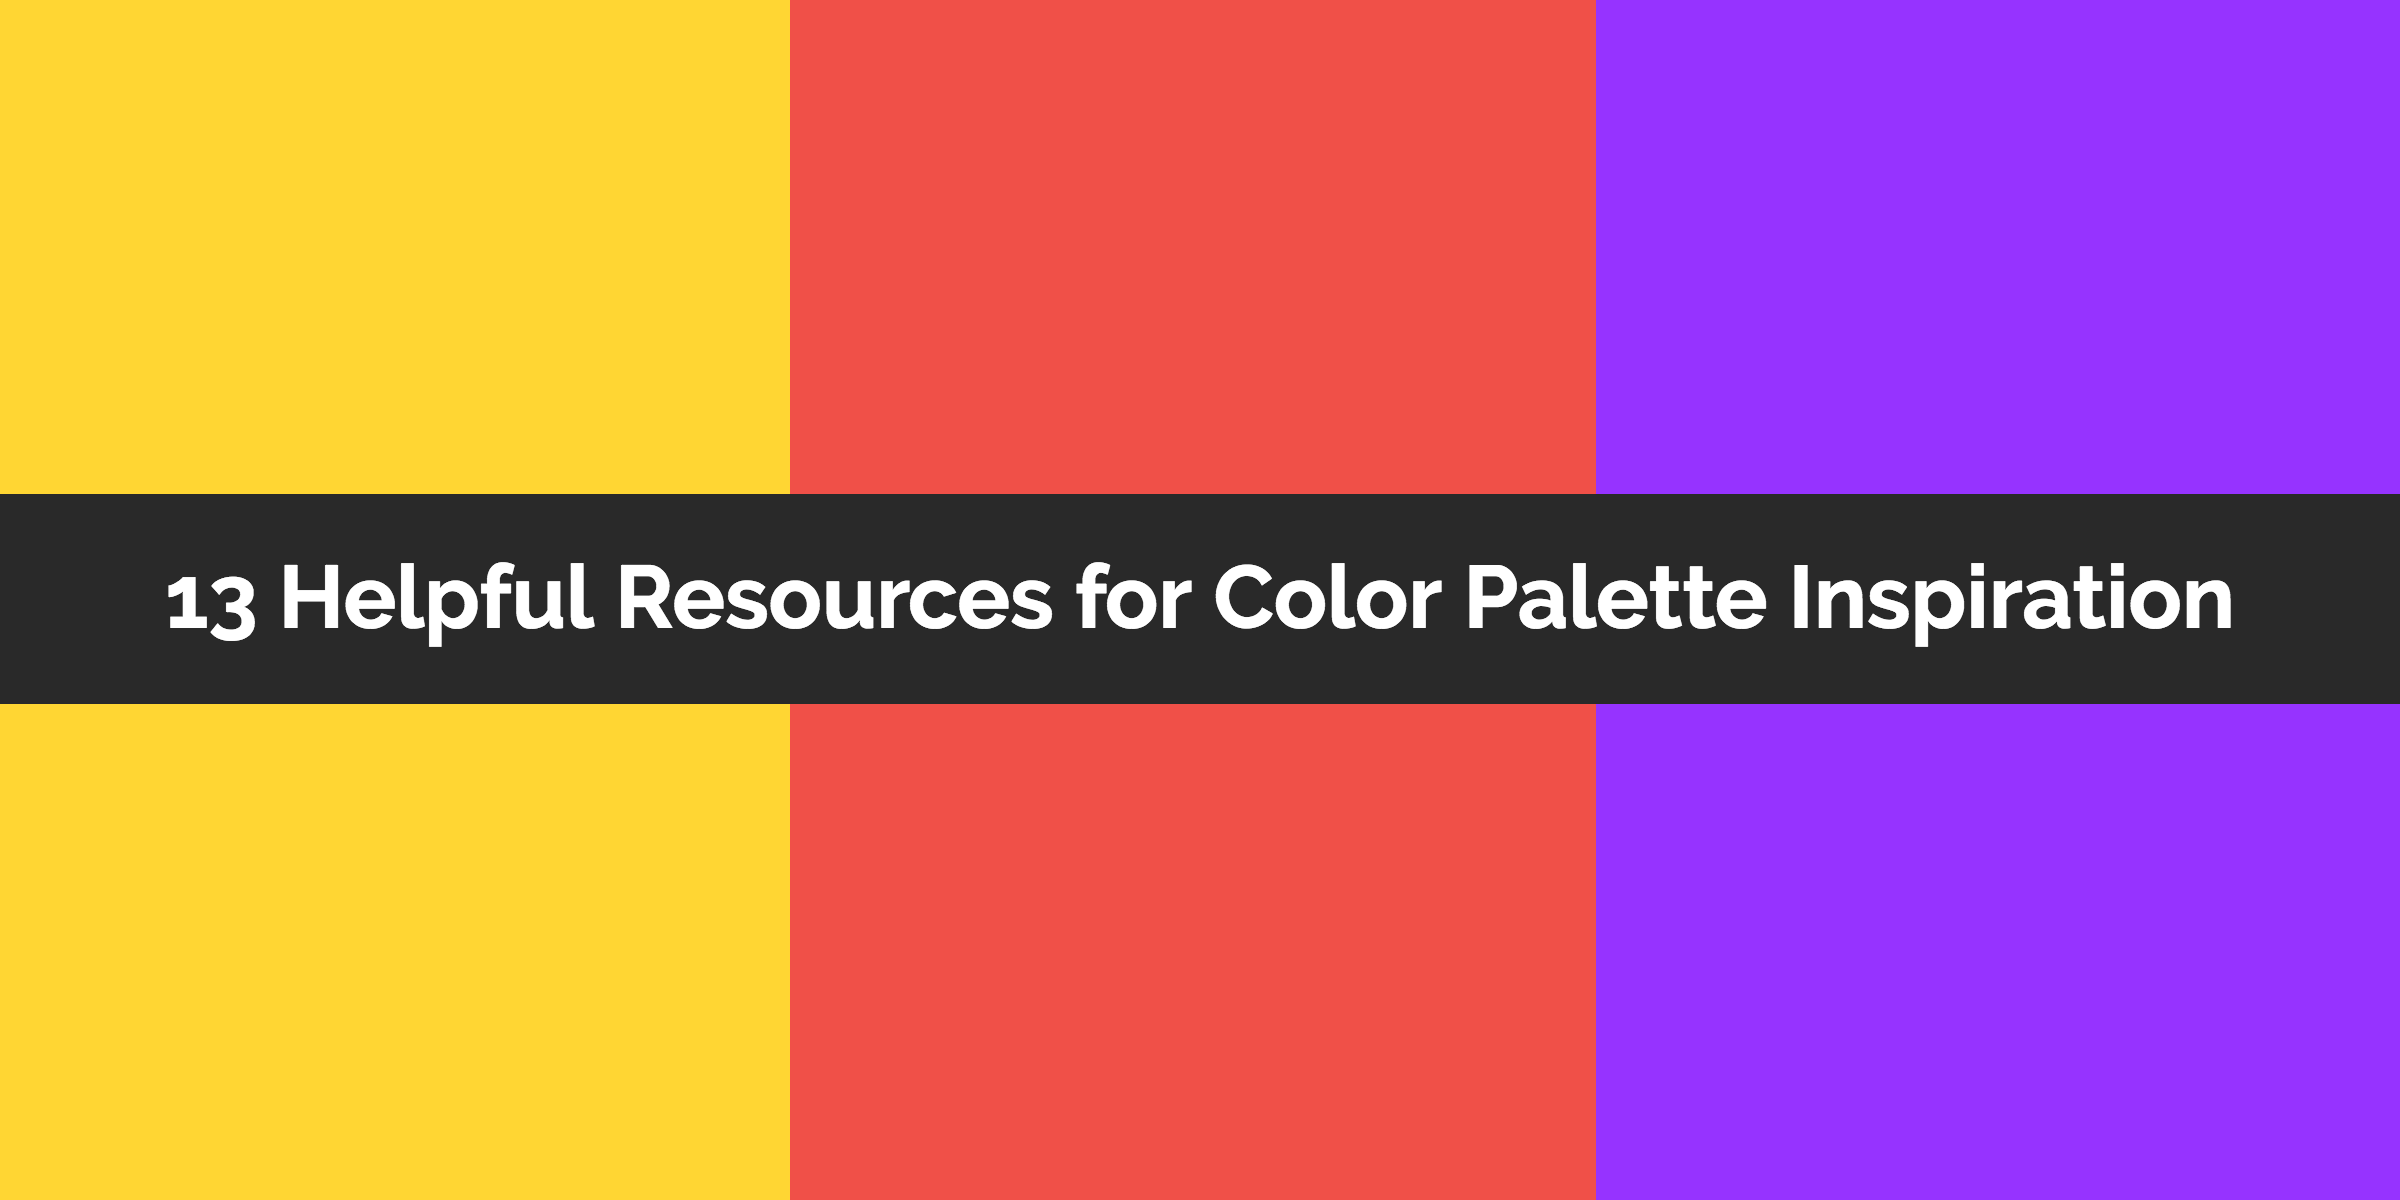 13 Helpful Resources for Color Palette Inspiration